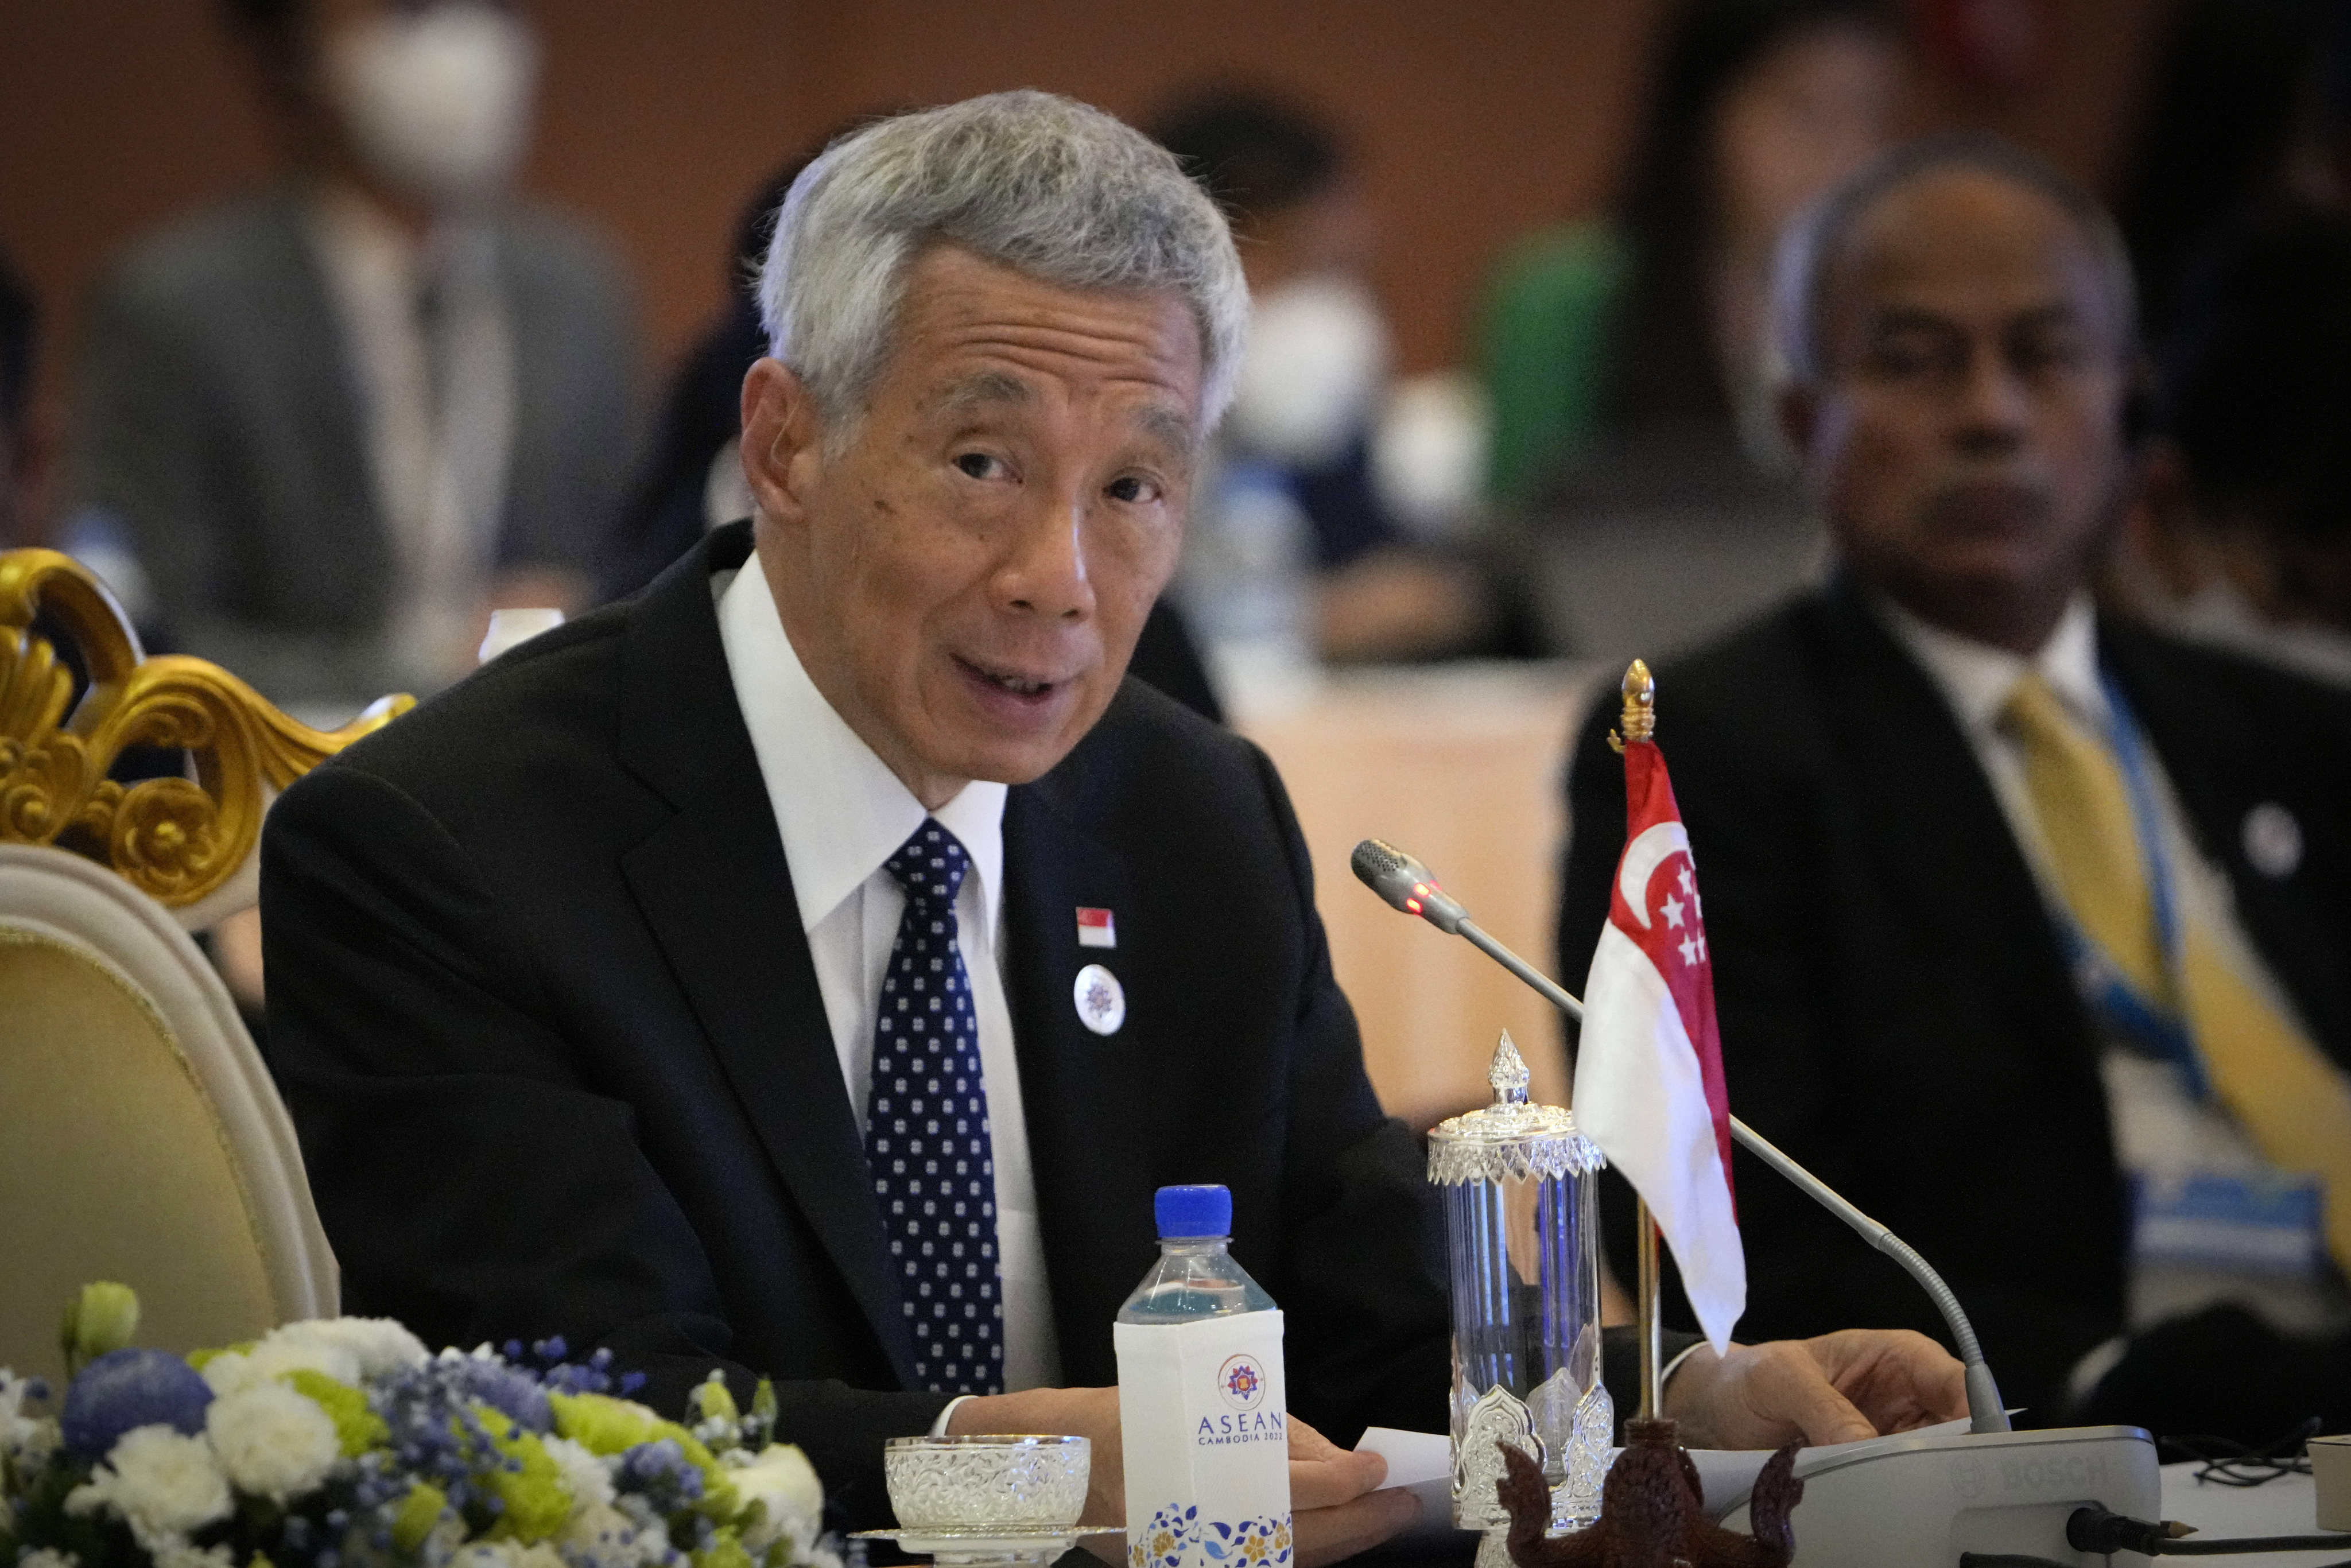 Singapore’s Prime Minister Lee Hsien Loong says he is finally Covid-free. Photo: AP